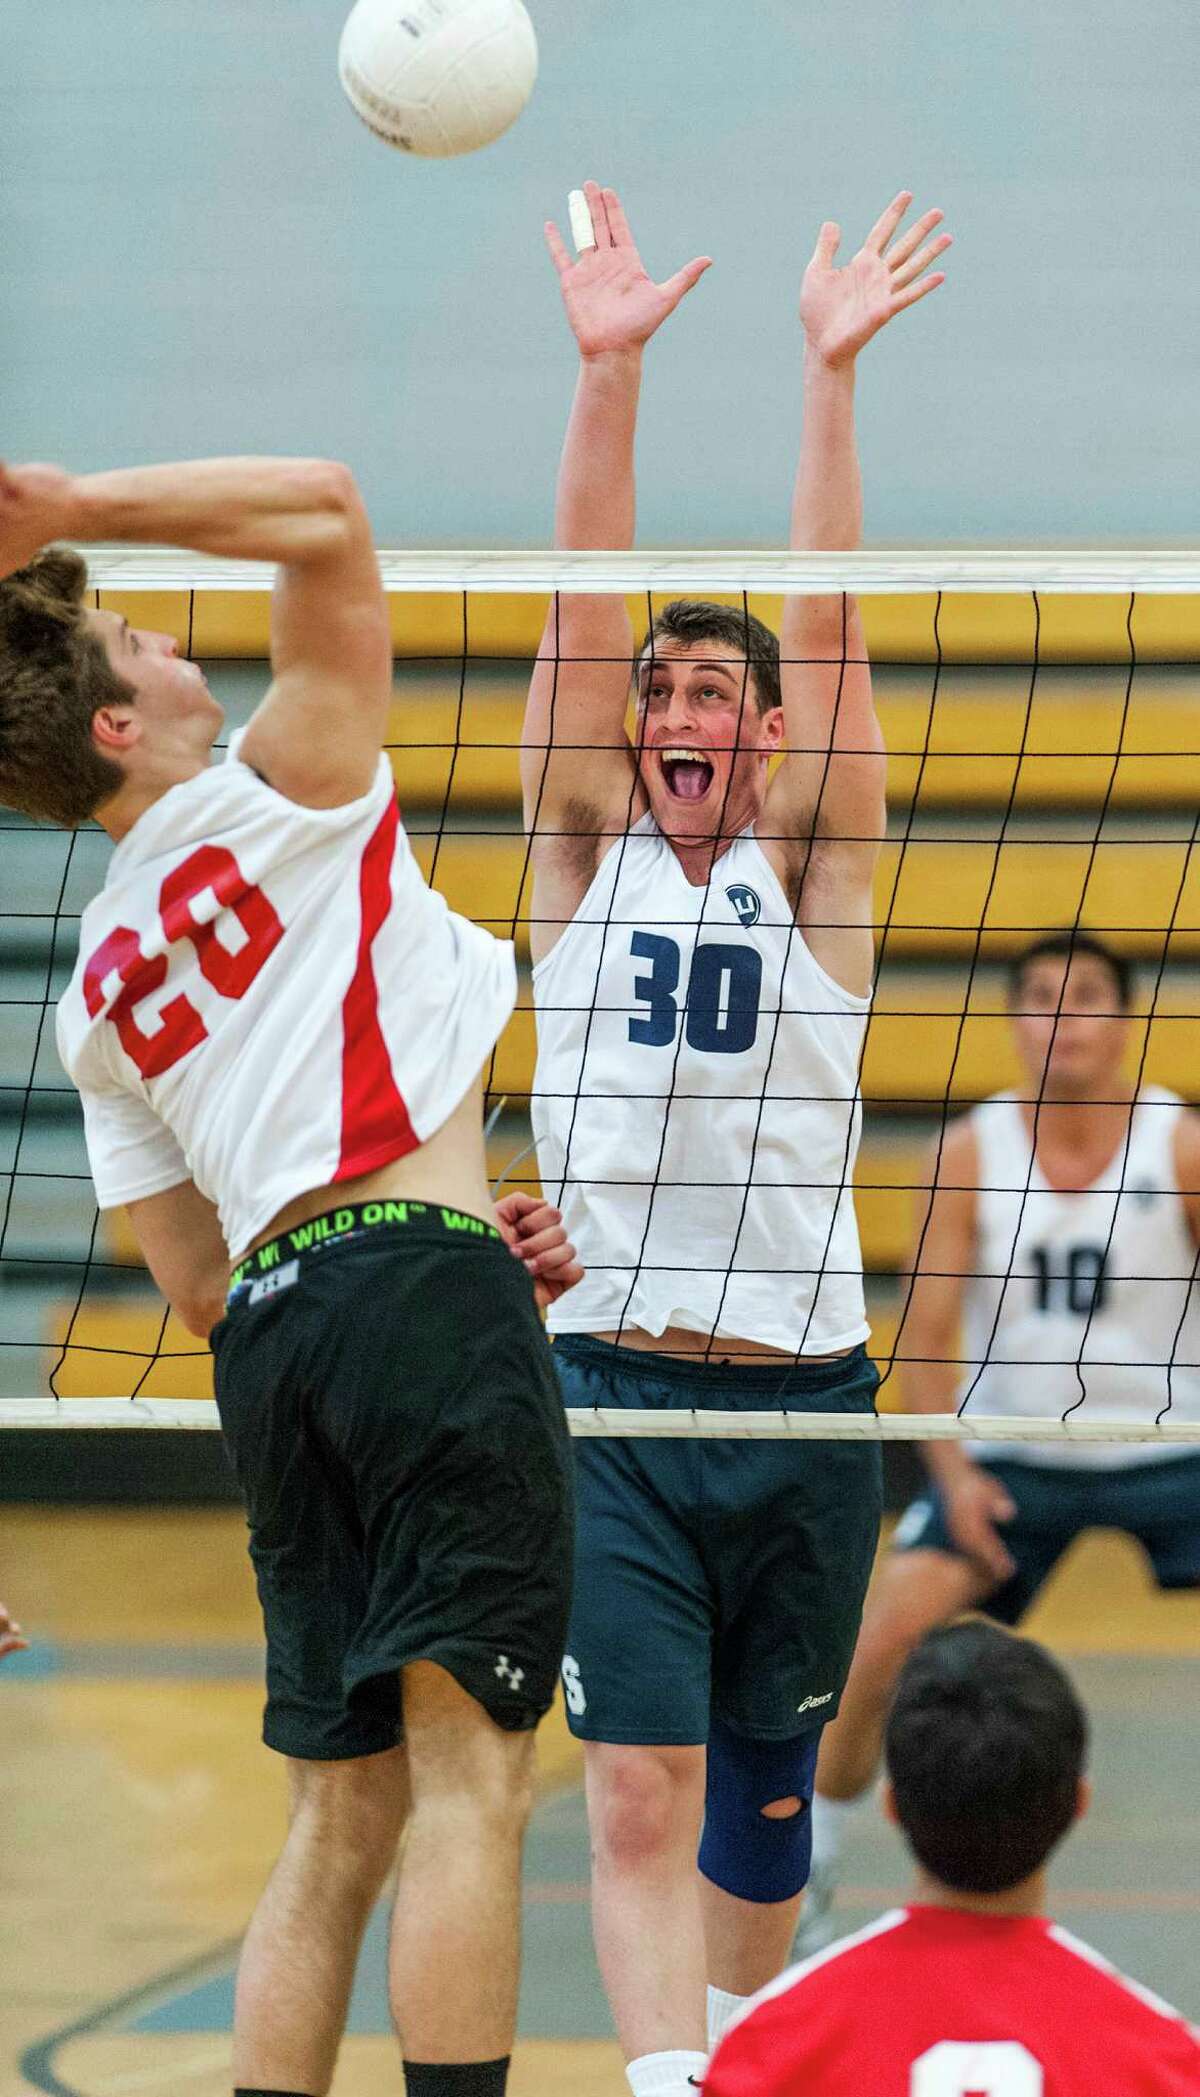 Staples high school's Todd Goldstein goes up to block a spike by Greenwich high school's Zak Steiner during an FCIAC boys volleyball semifinal match played at Fairfield Ludlowe high school, Fairfield, CT on Wednesday May 22nd, 2013.